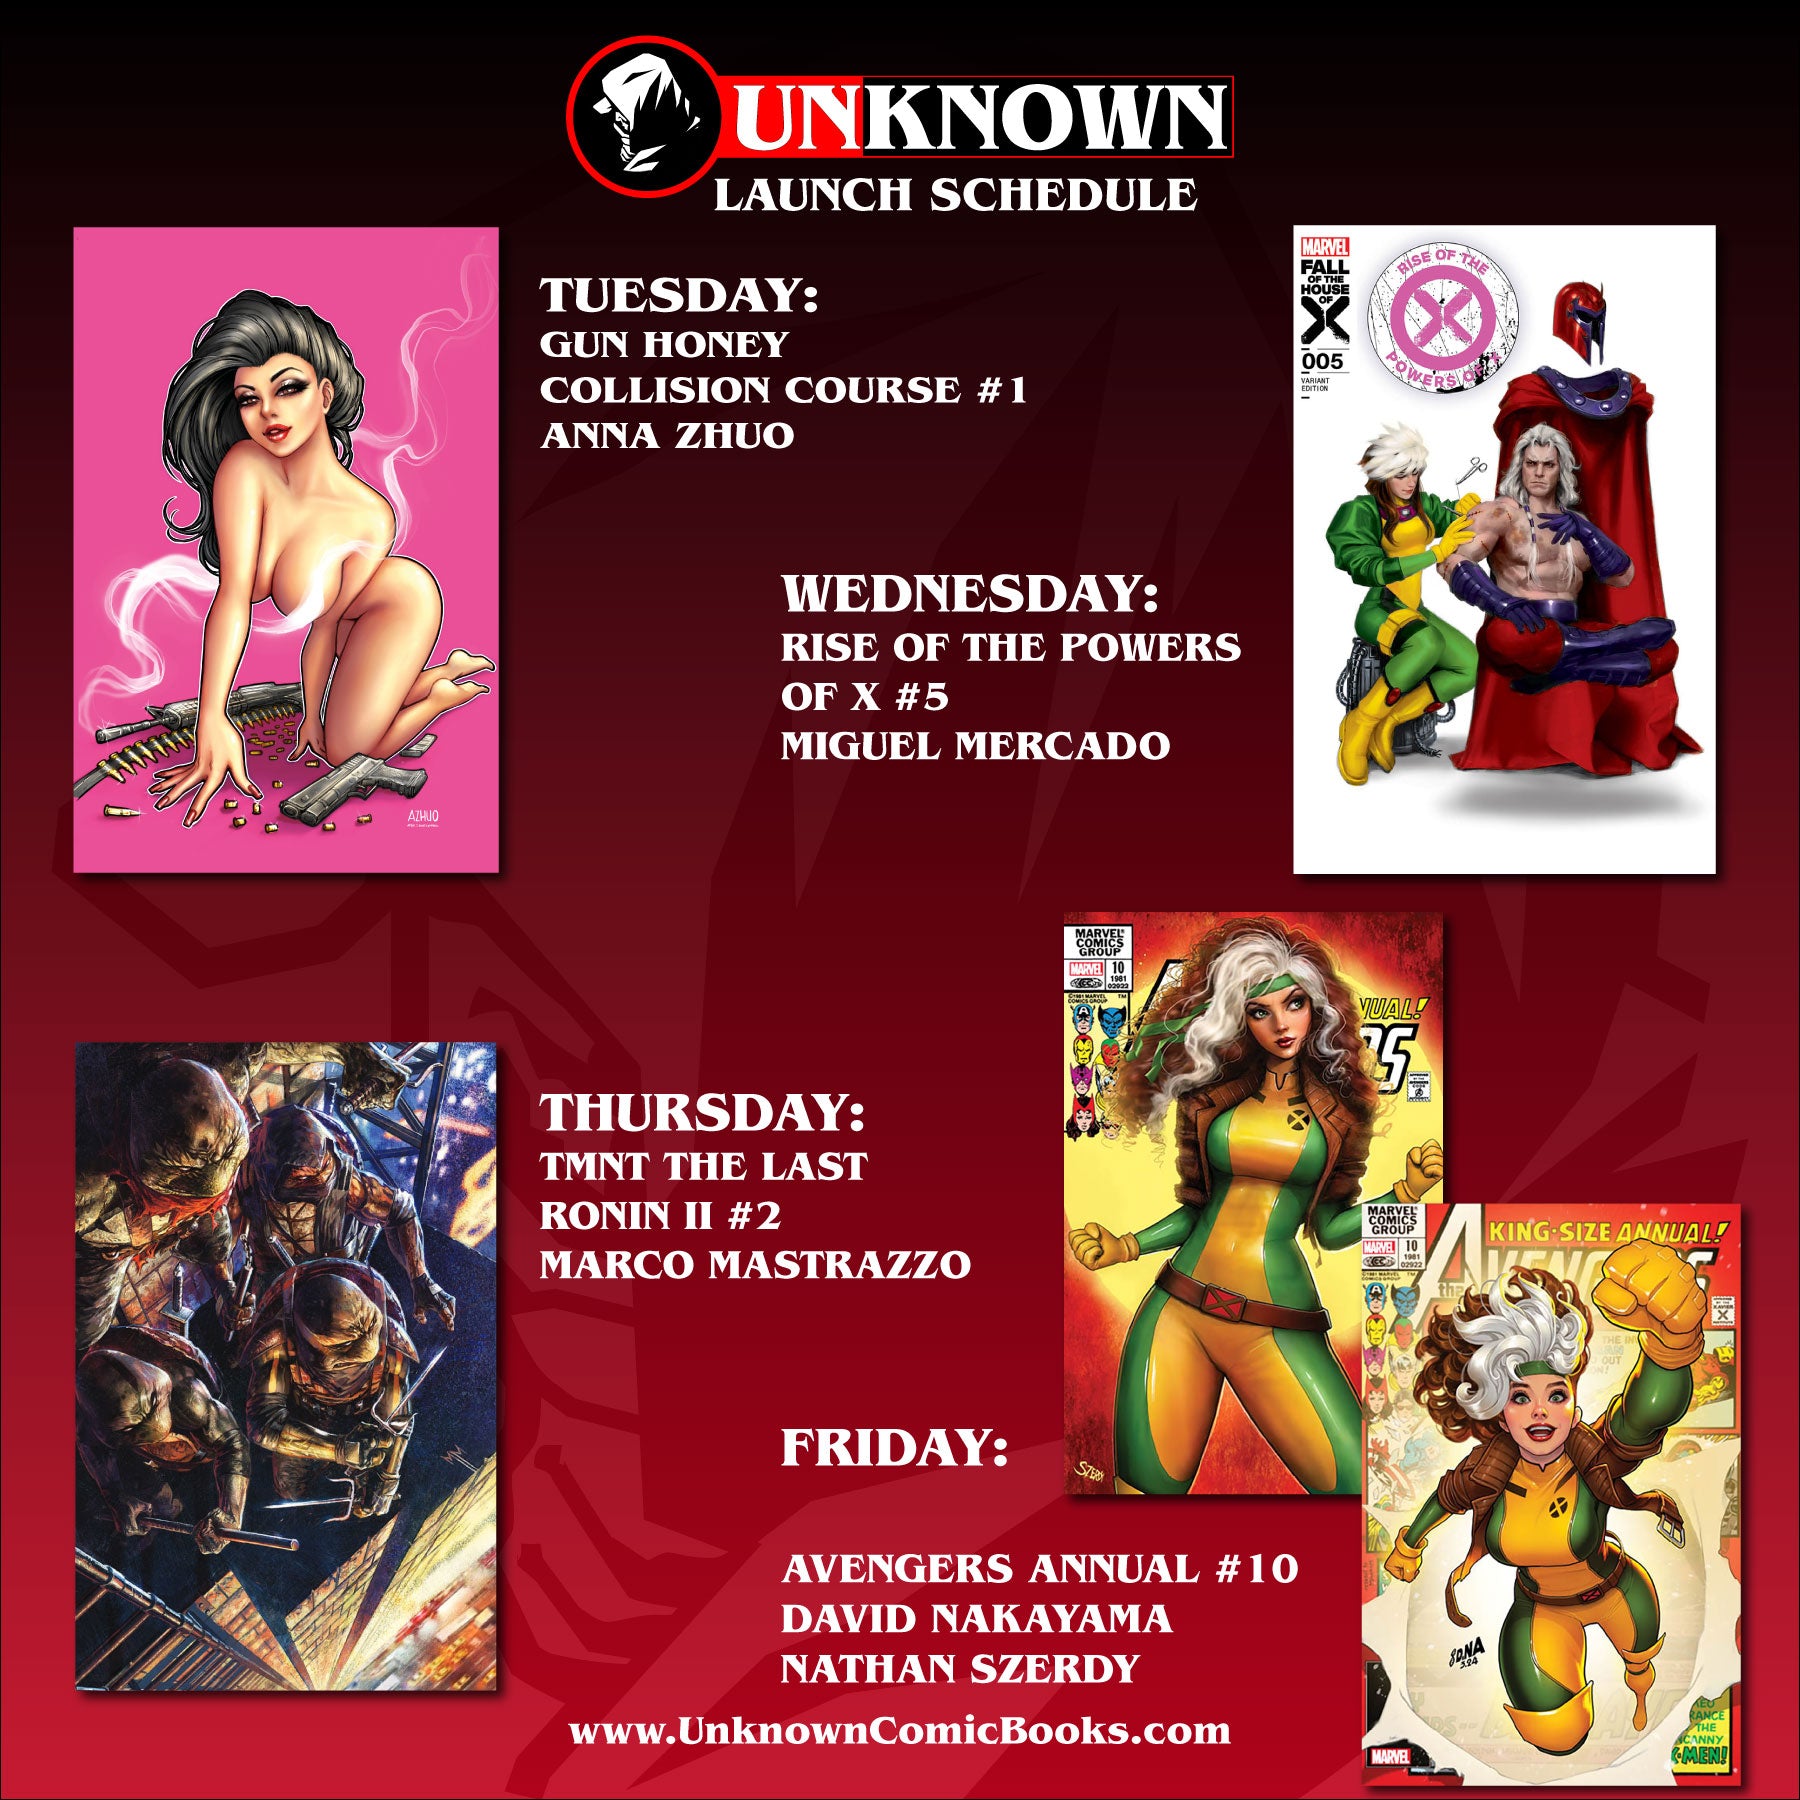 Unknown Comics: Your Guide to a Comic-Filled Week